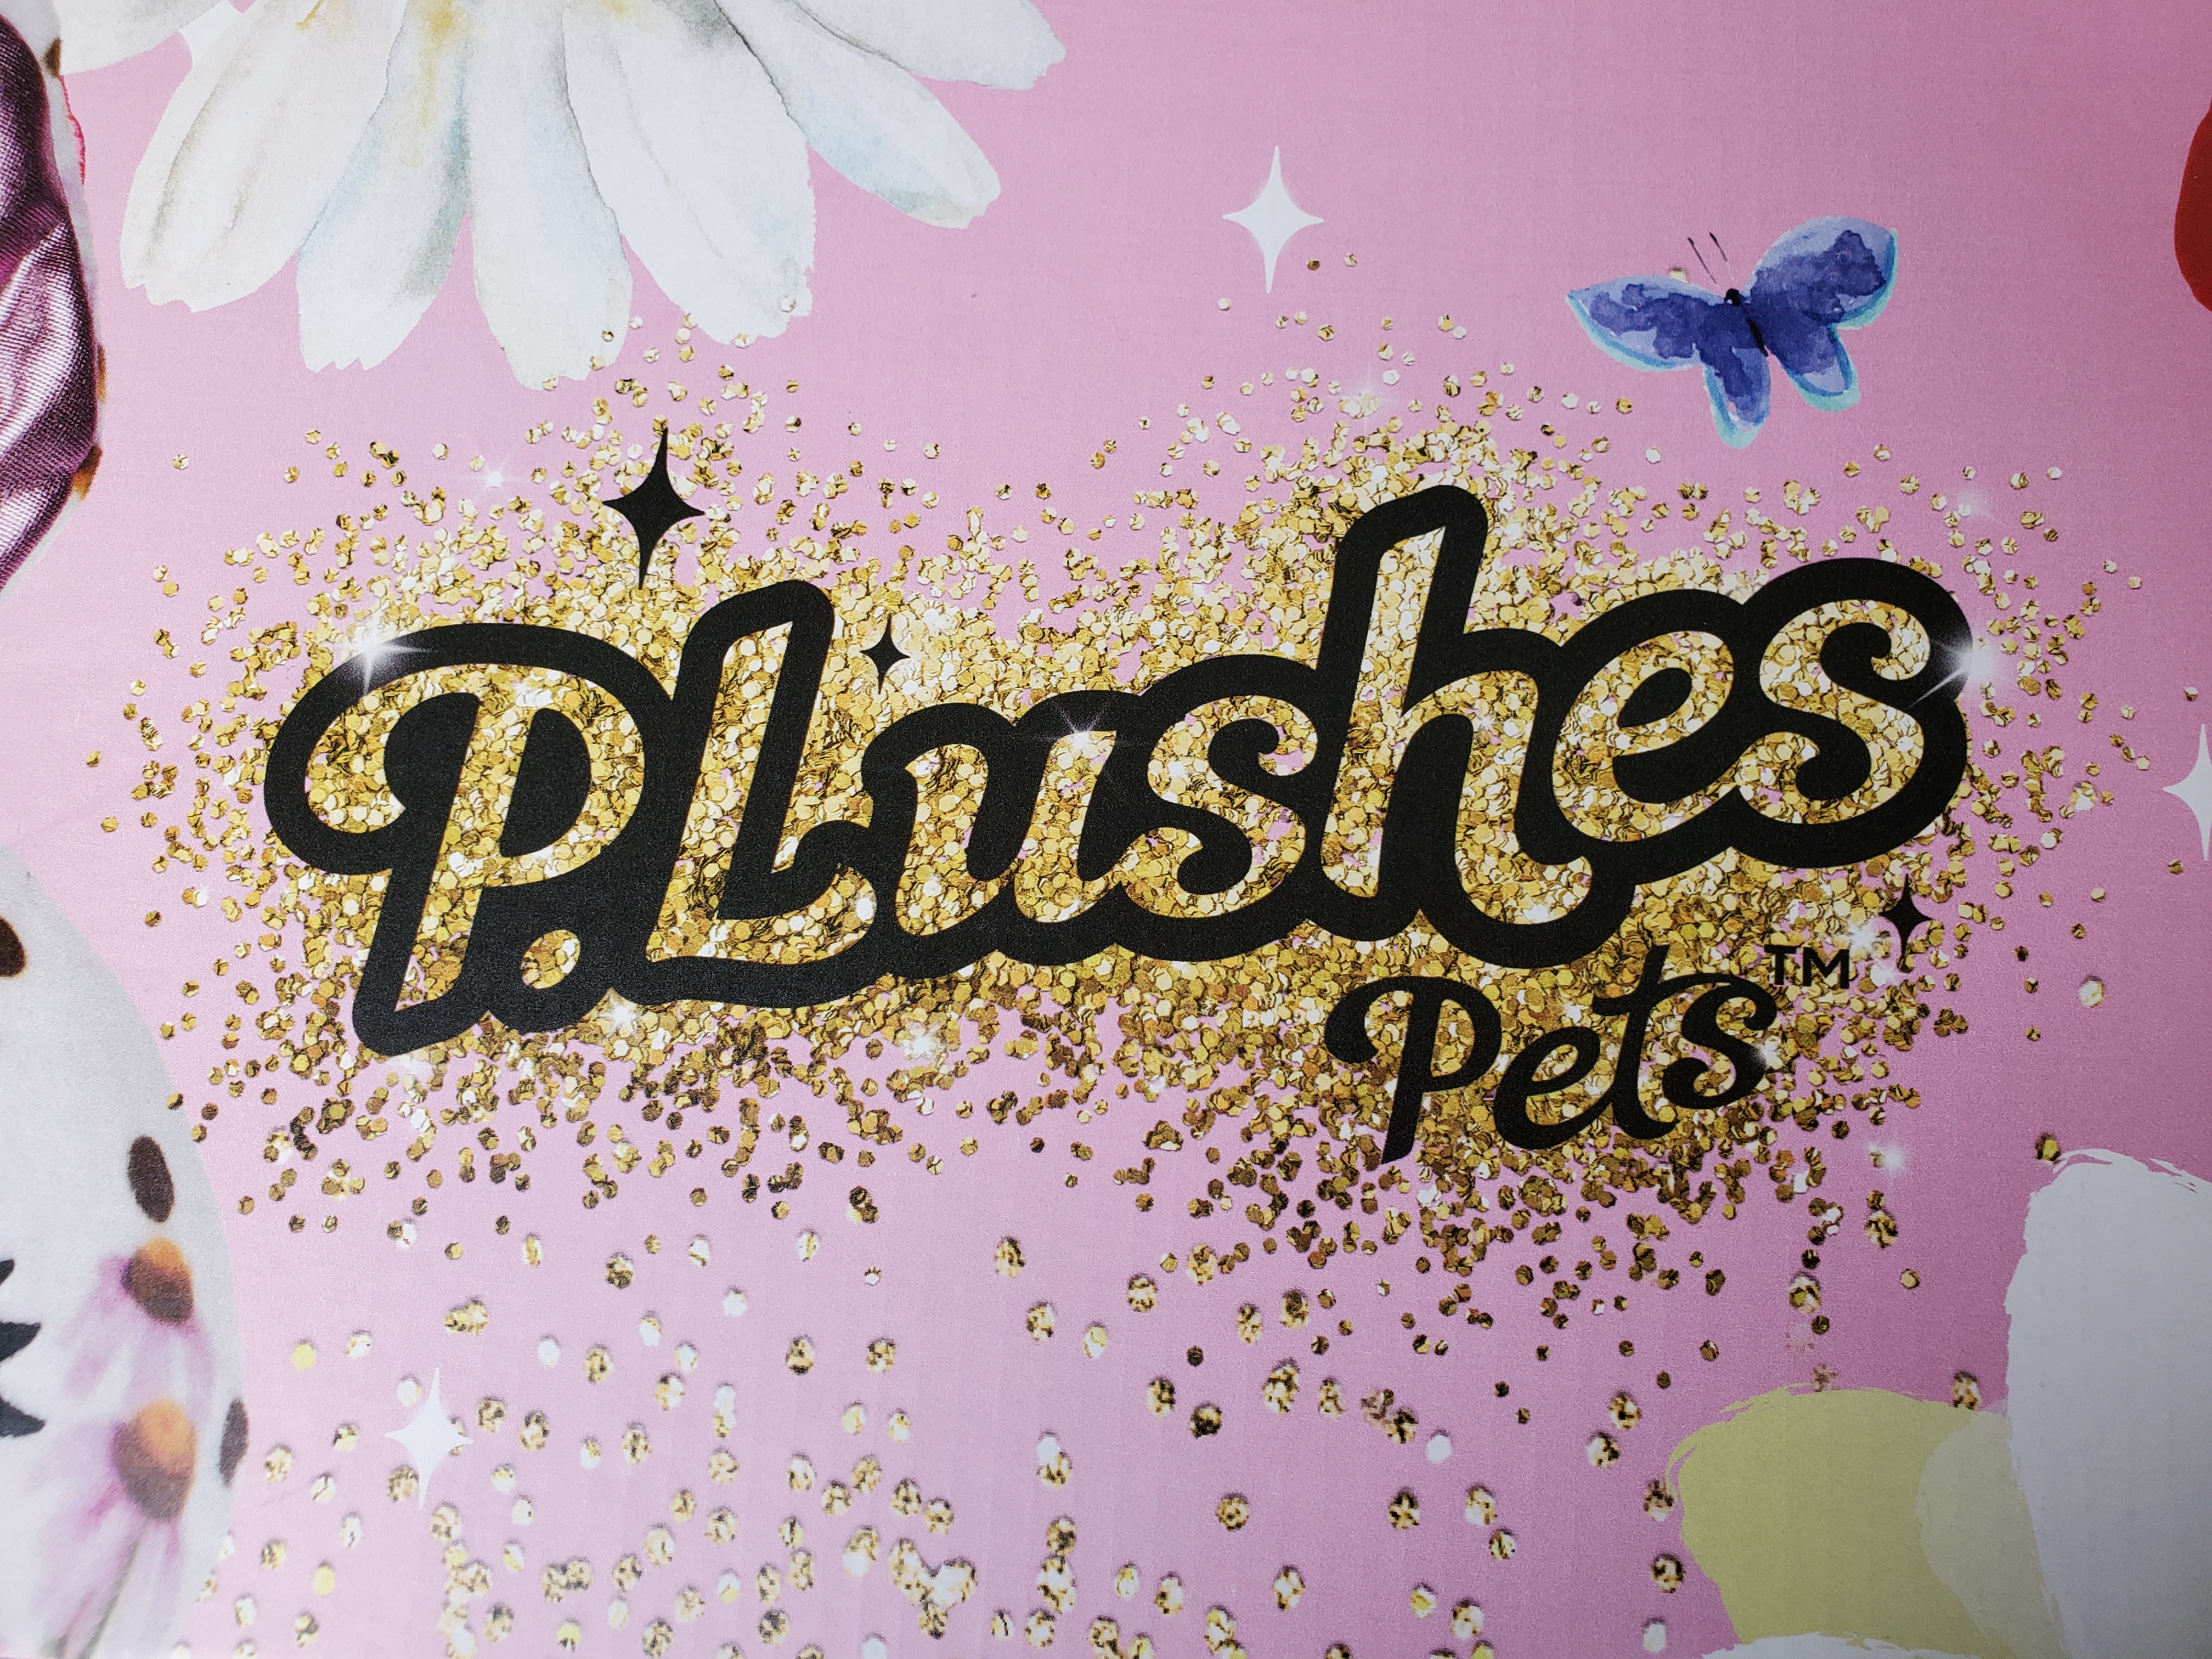 P. Lushes Pets